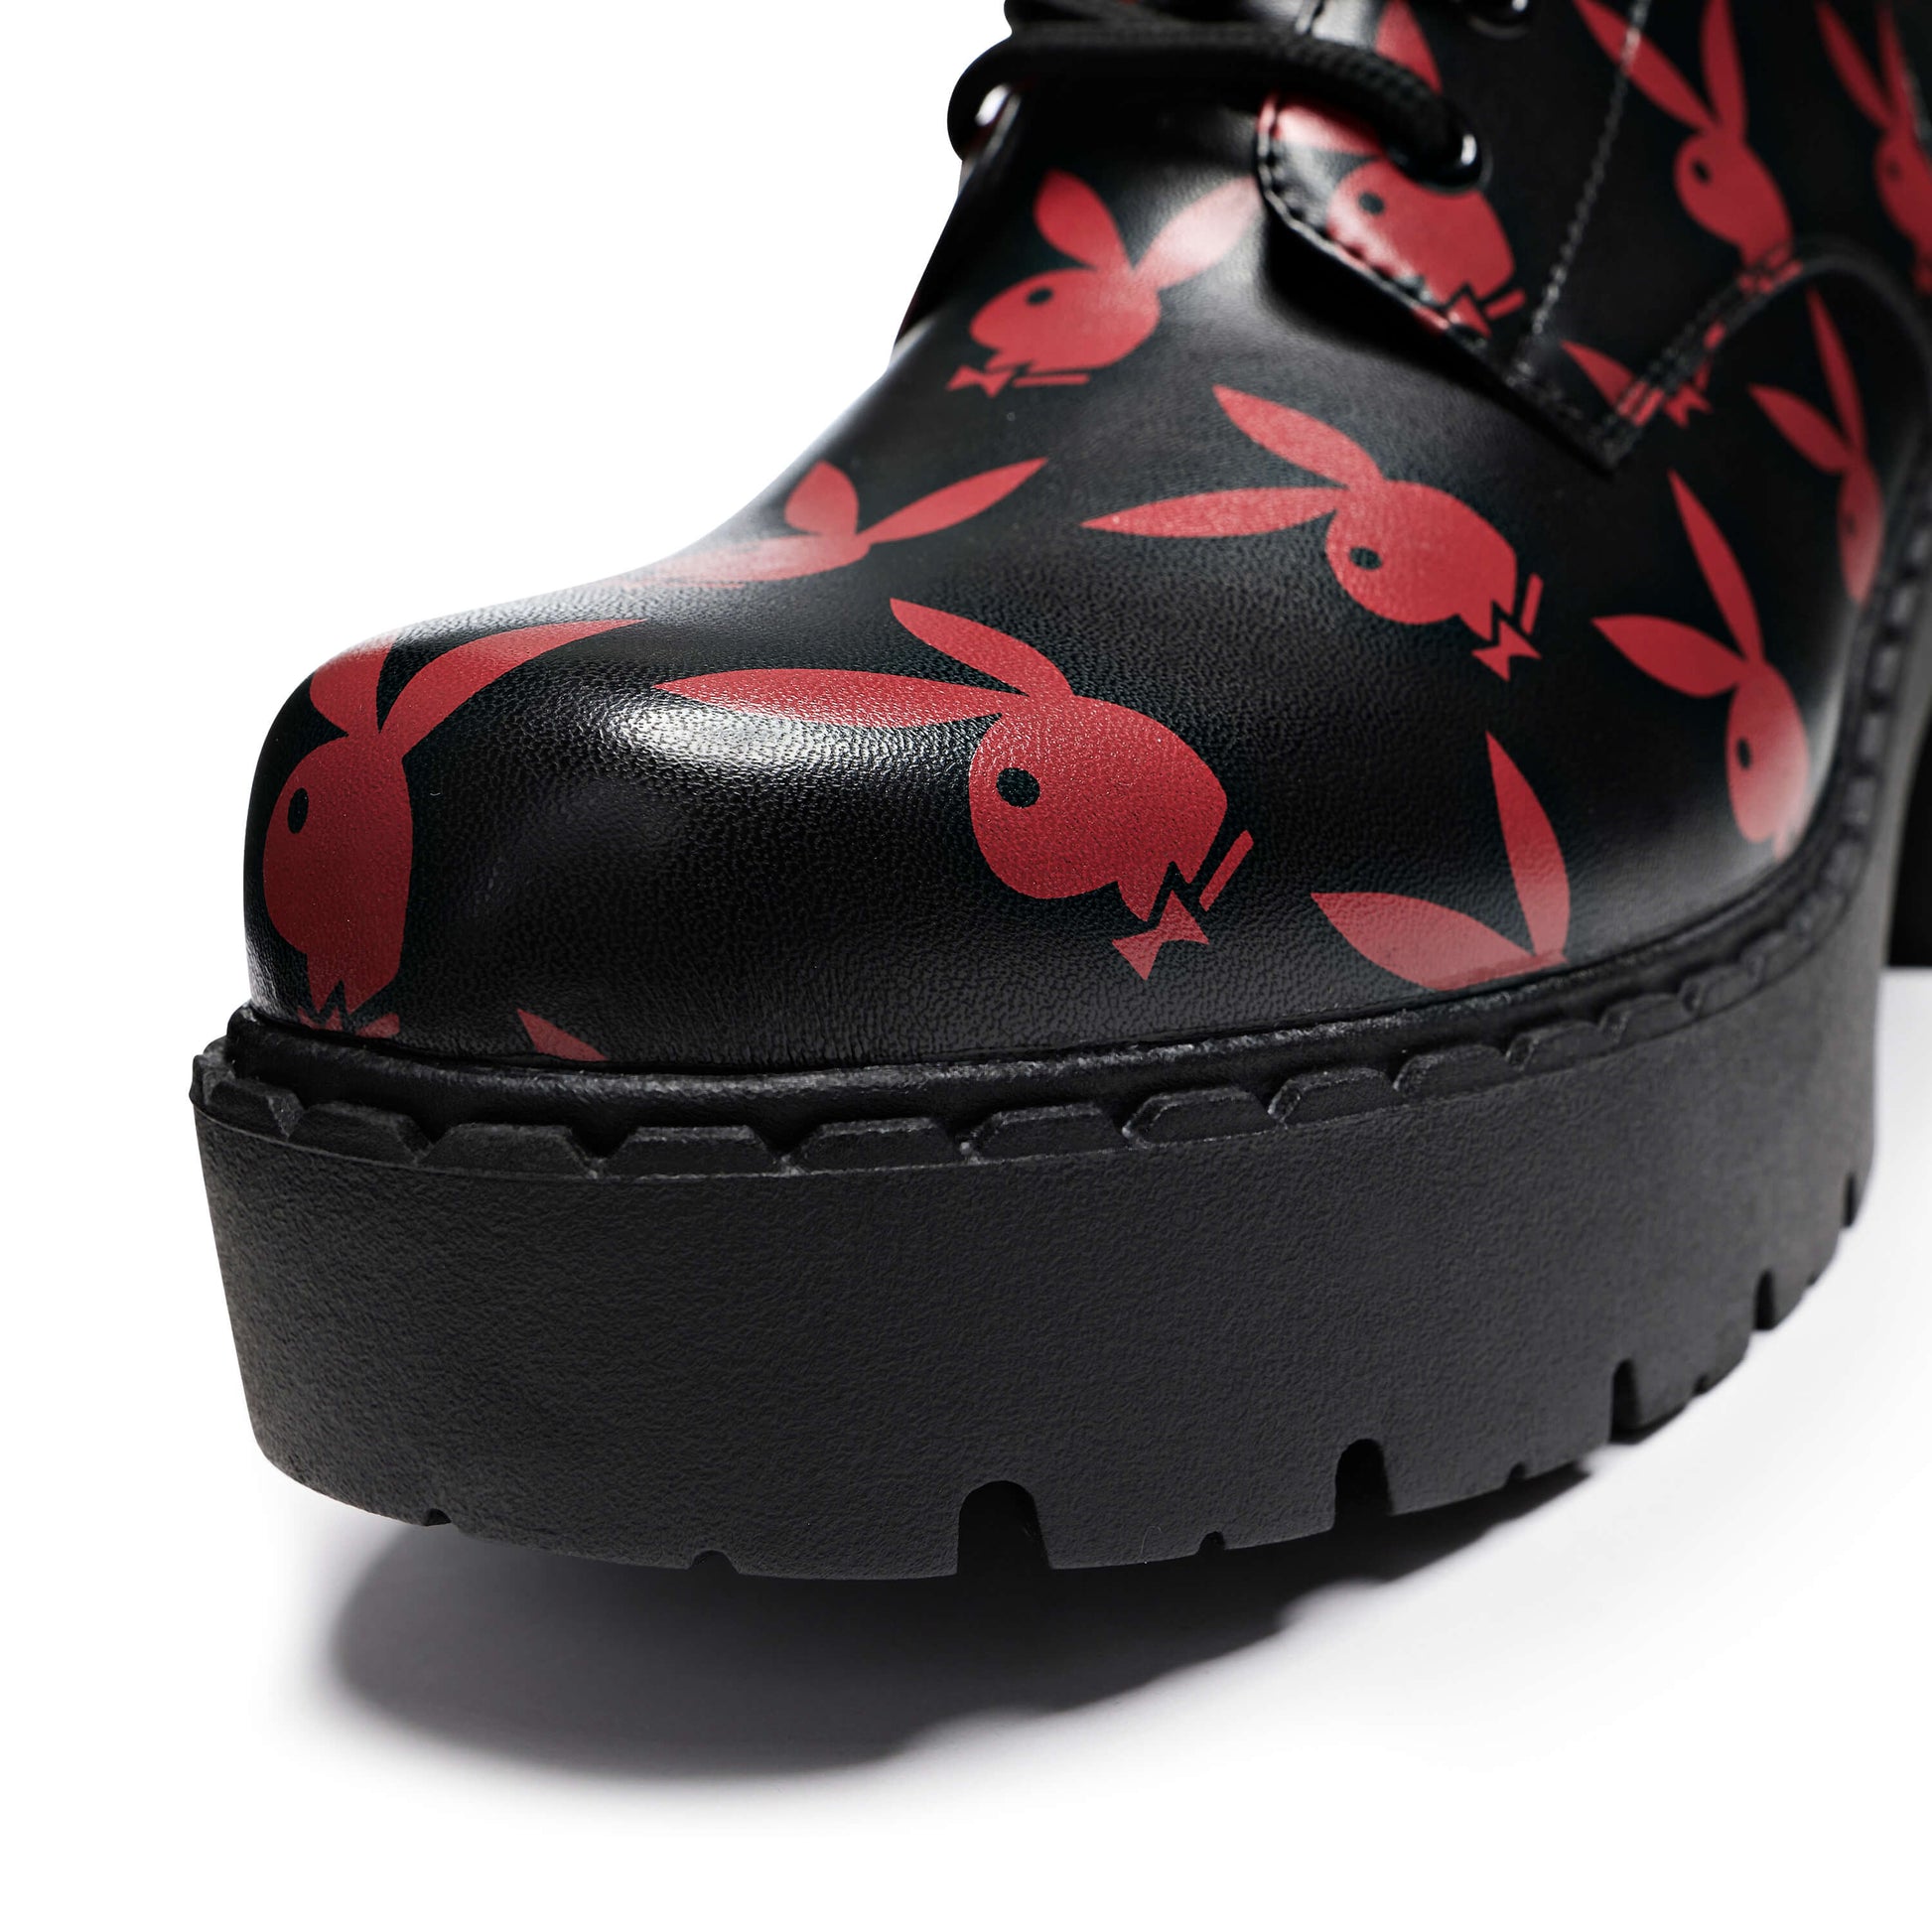 Playboy Reprise Red Switch Boots | Playboy x Koi Collection, UK 3 / Black